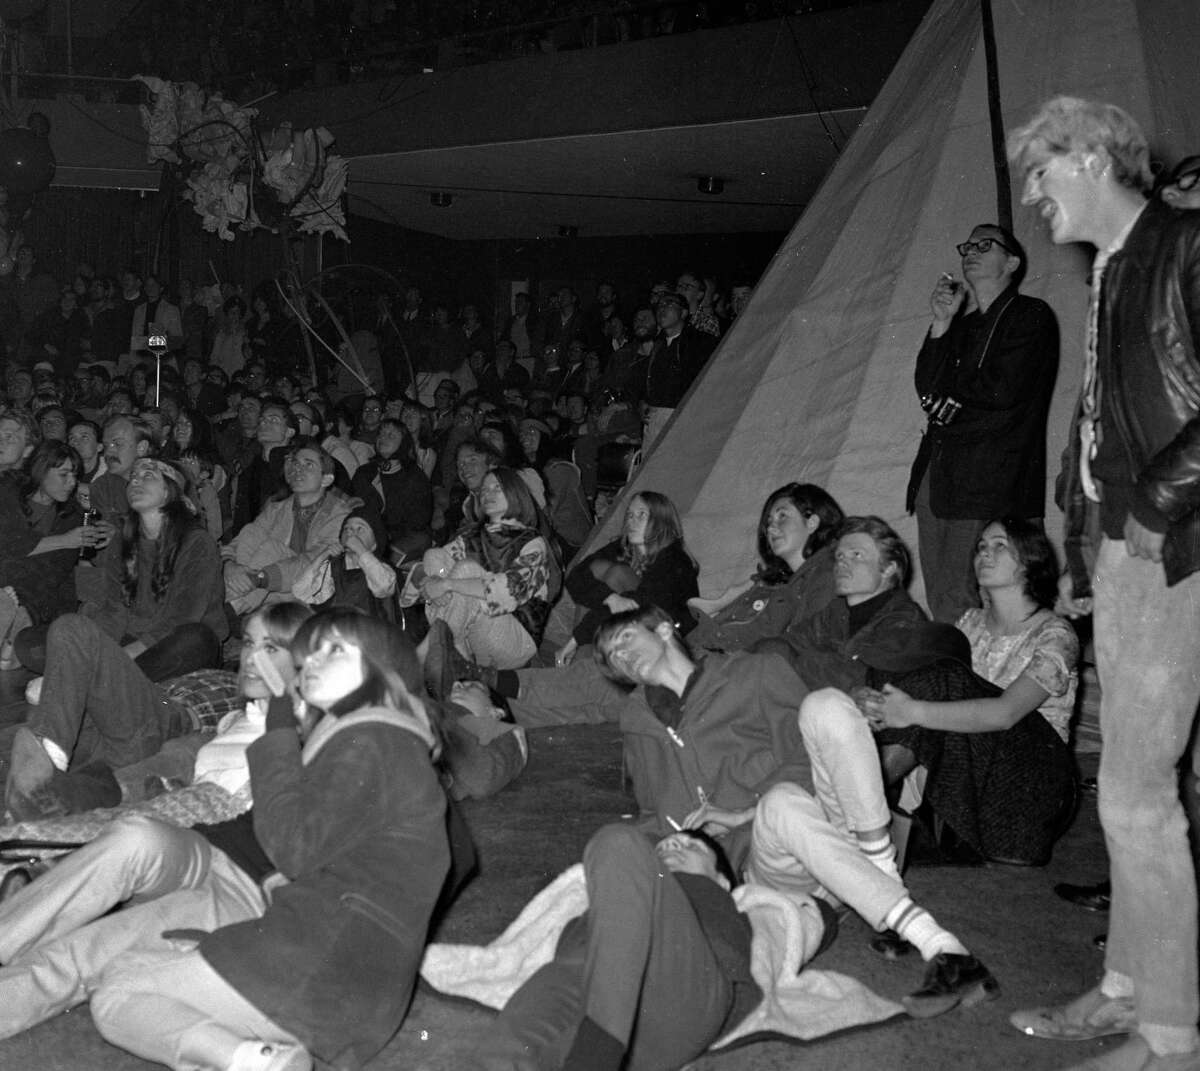 The Trips Festival Acid Test at Longshoreman’s Hall, where the Grateful Dead performed.